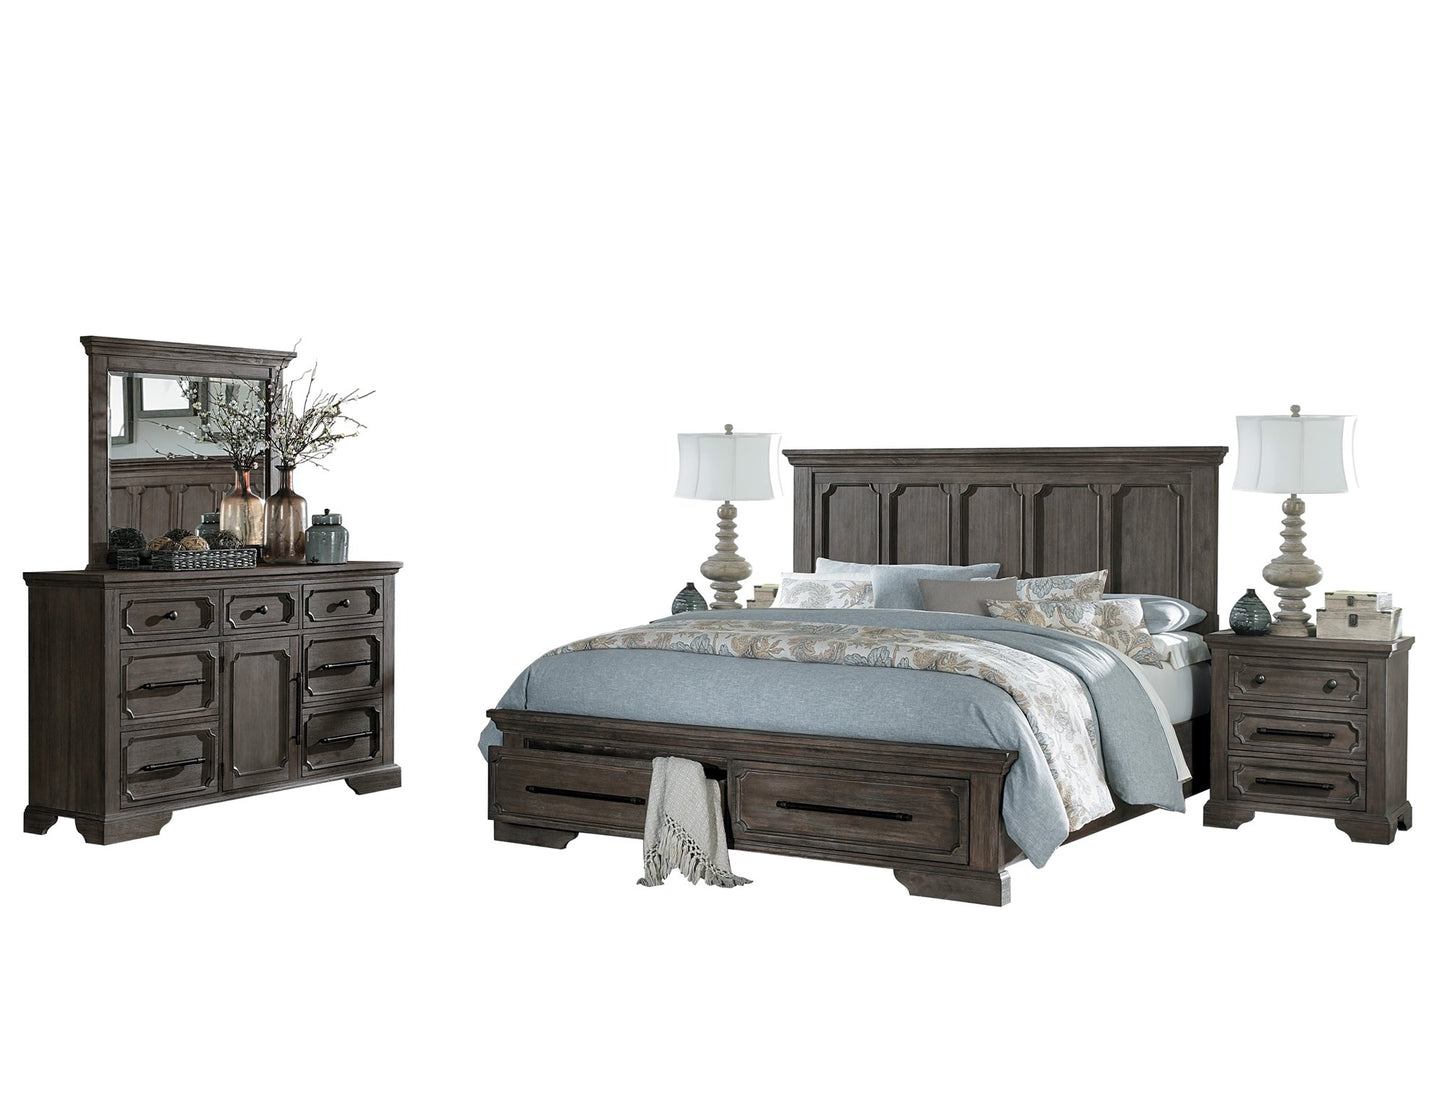 Homelegance Toulon 5PC Bedroom Set Queen Platform Bed with Footboard Storages Dresser Mirror Two Nightstand in Distressed Oak